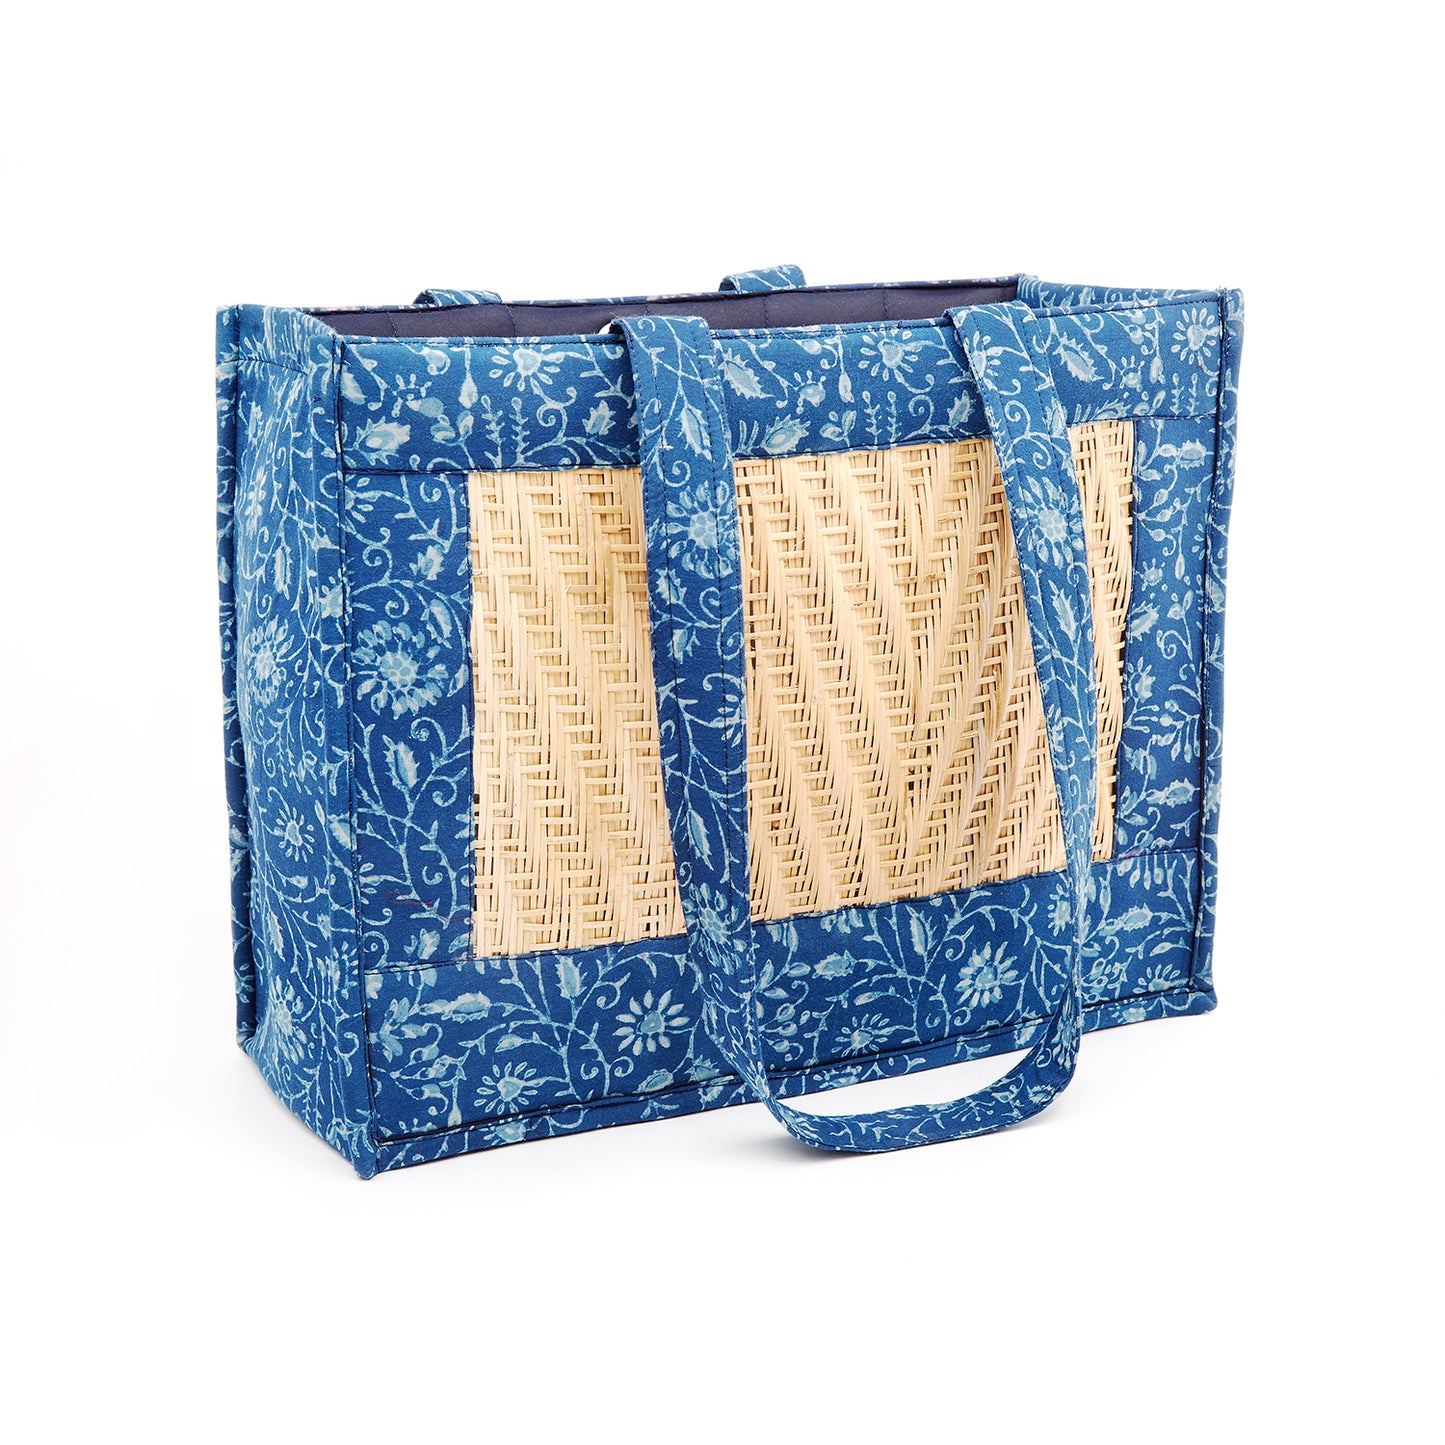 Beautiful Sea Blue Recycled Fabric Bags with Cane Work- Recycled Carry Bag